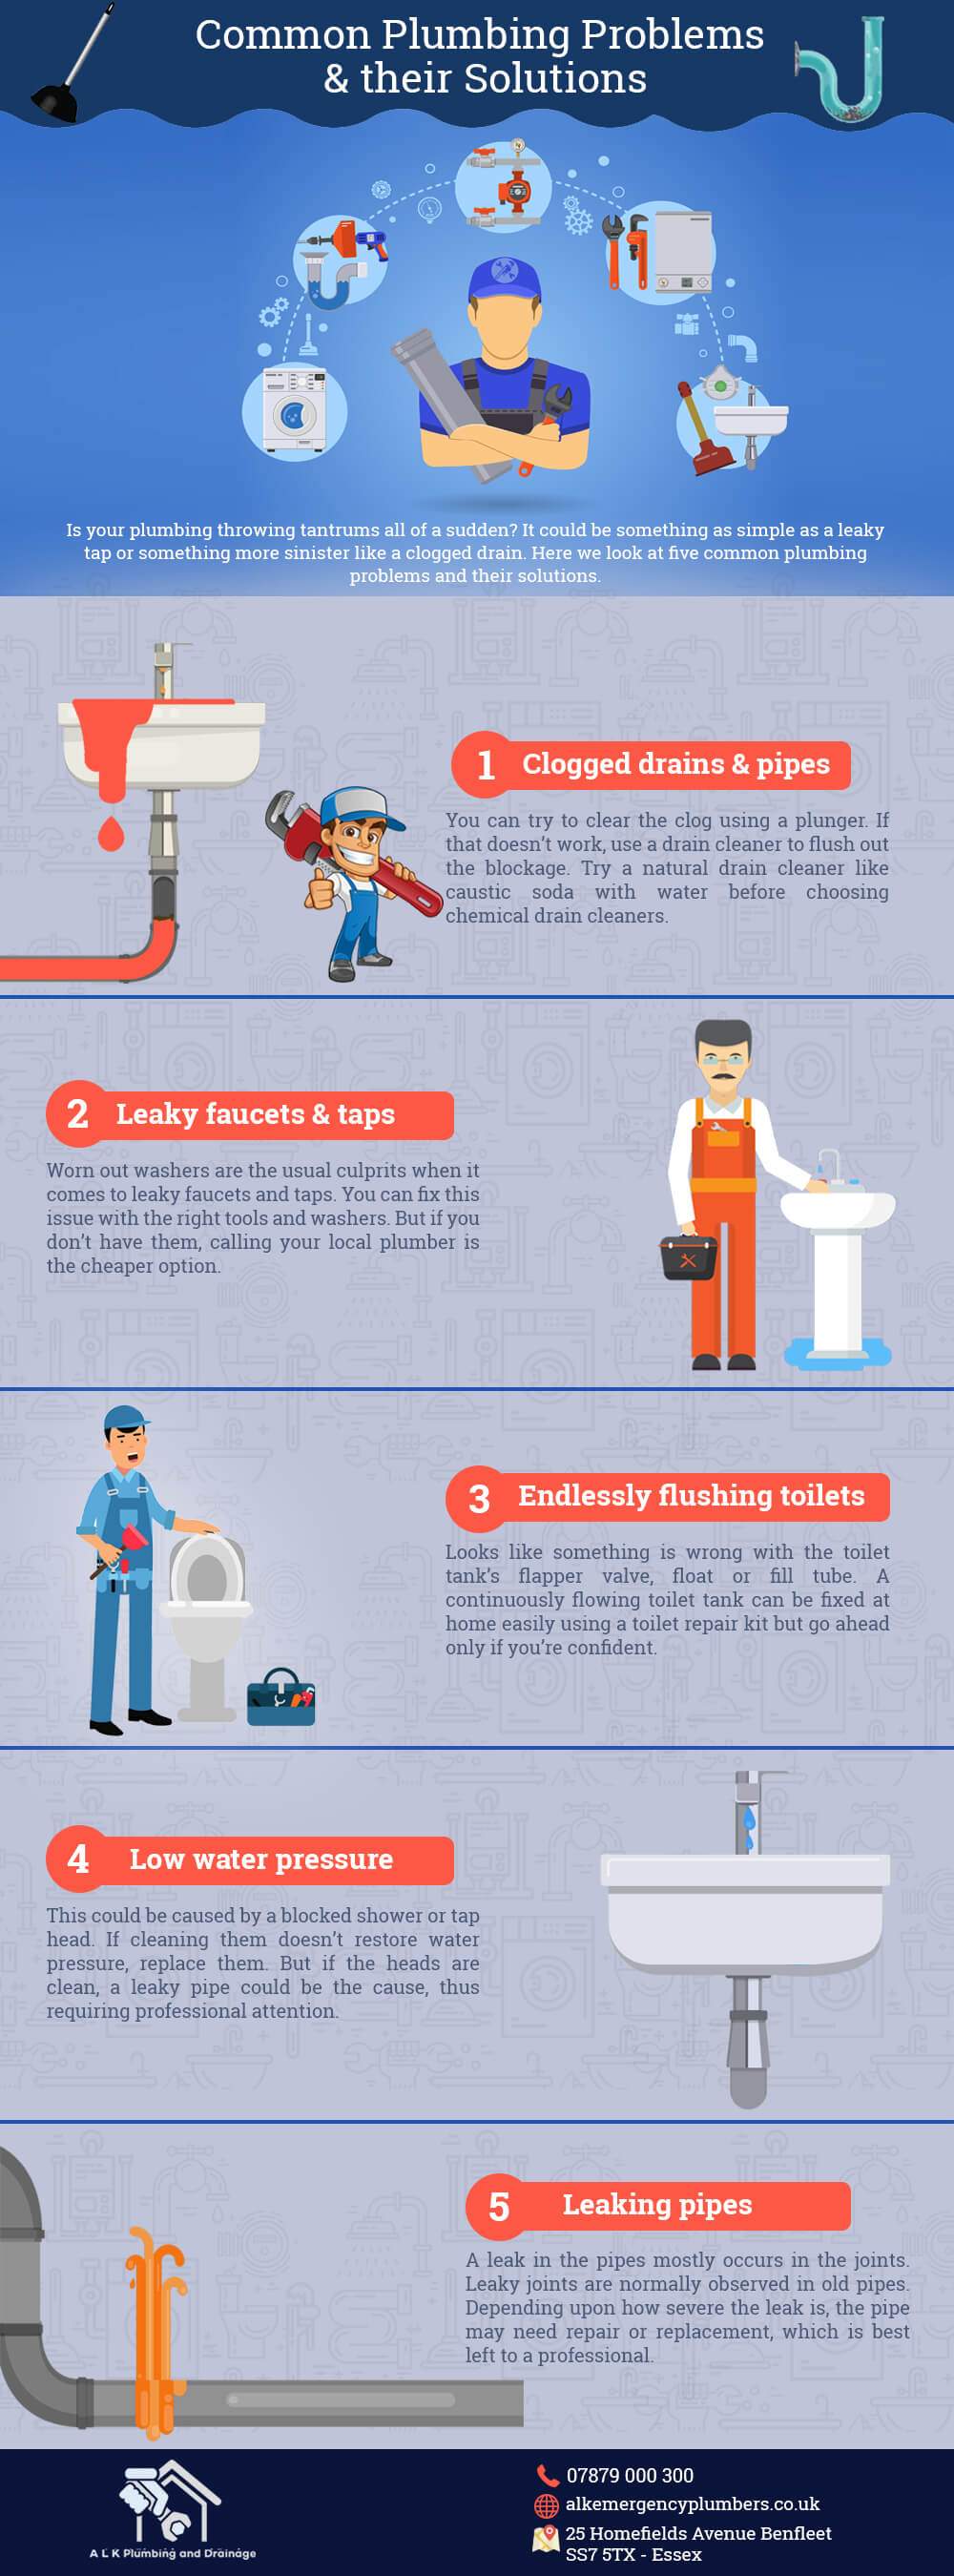 Common Plumbing Problems & their Solutions